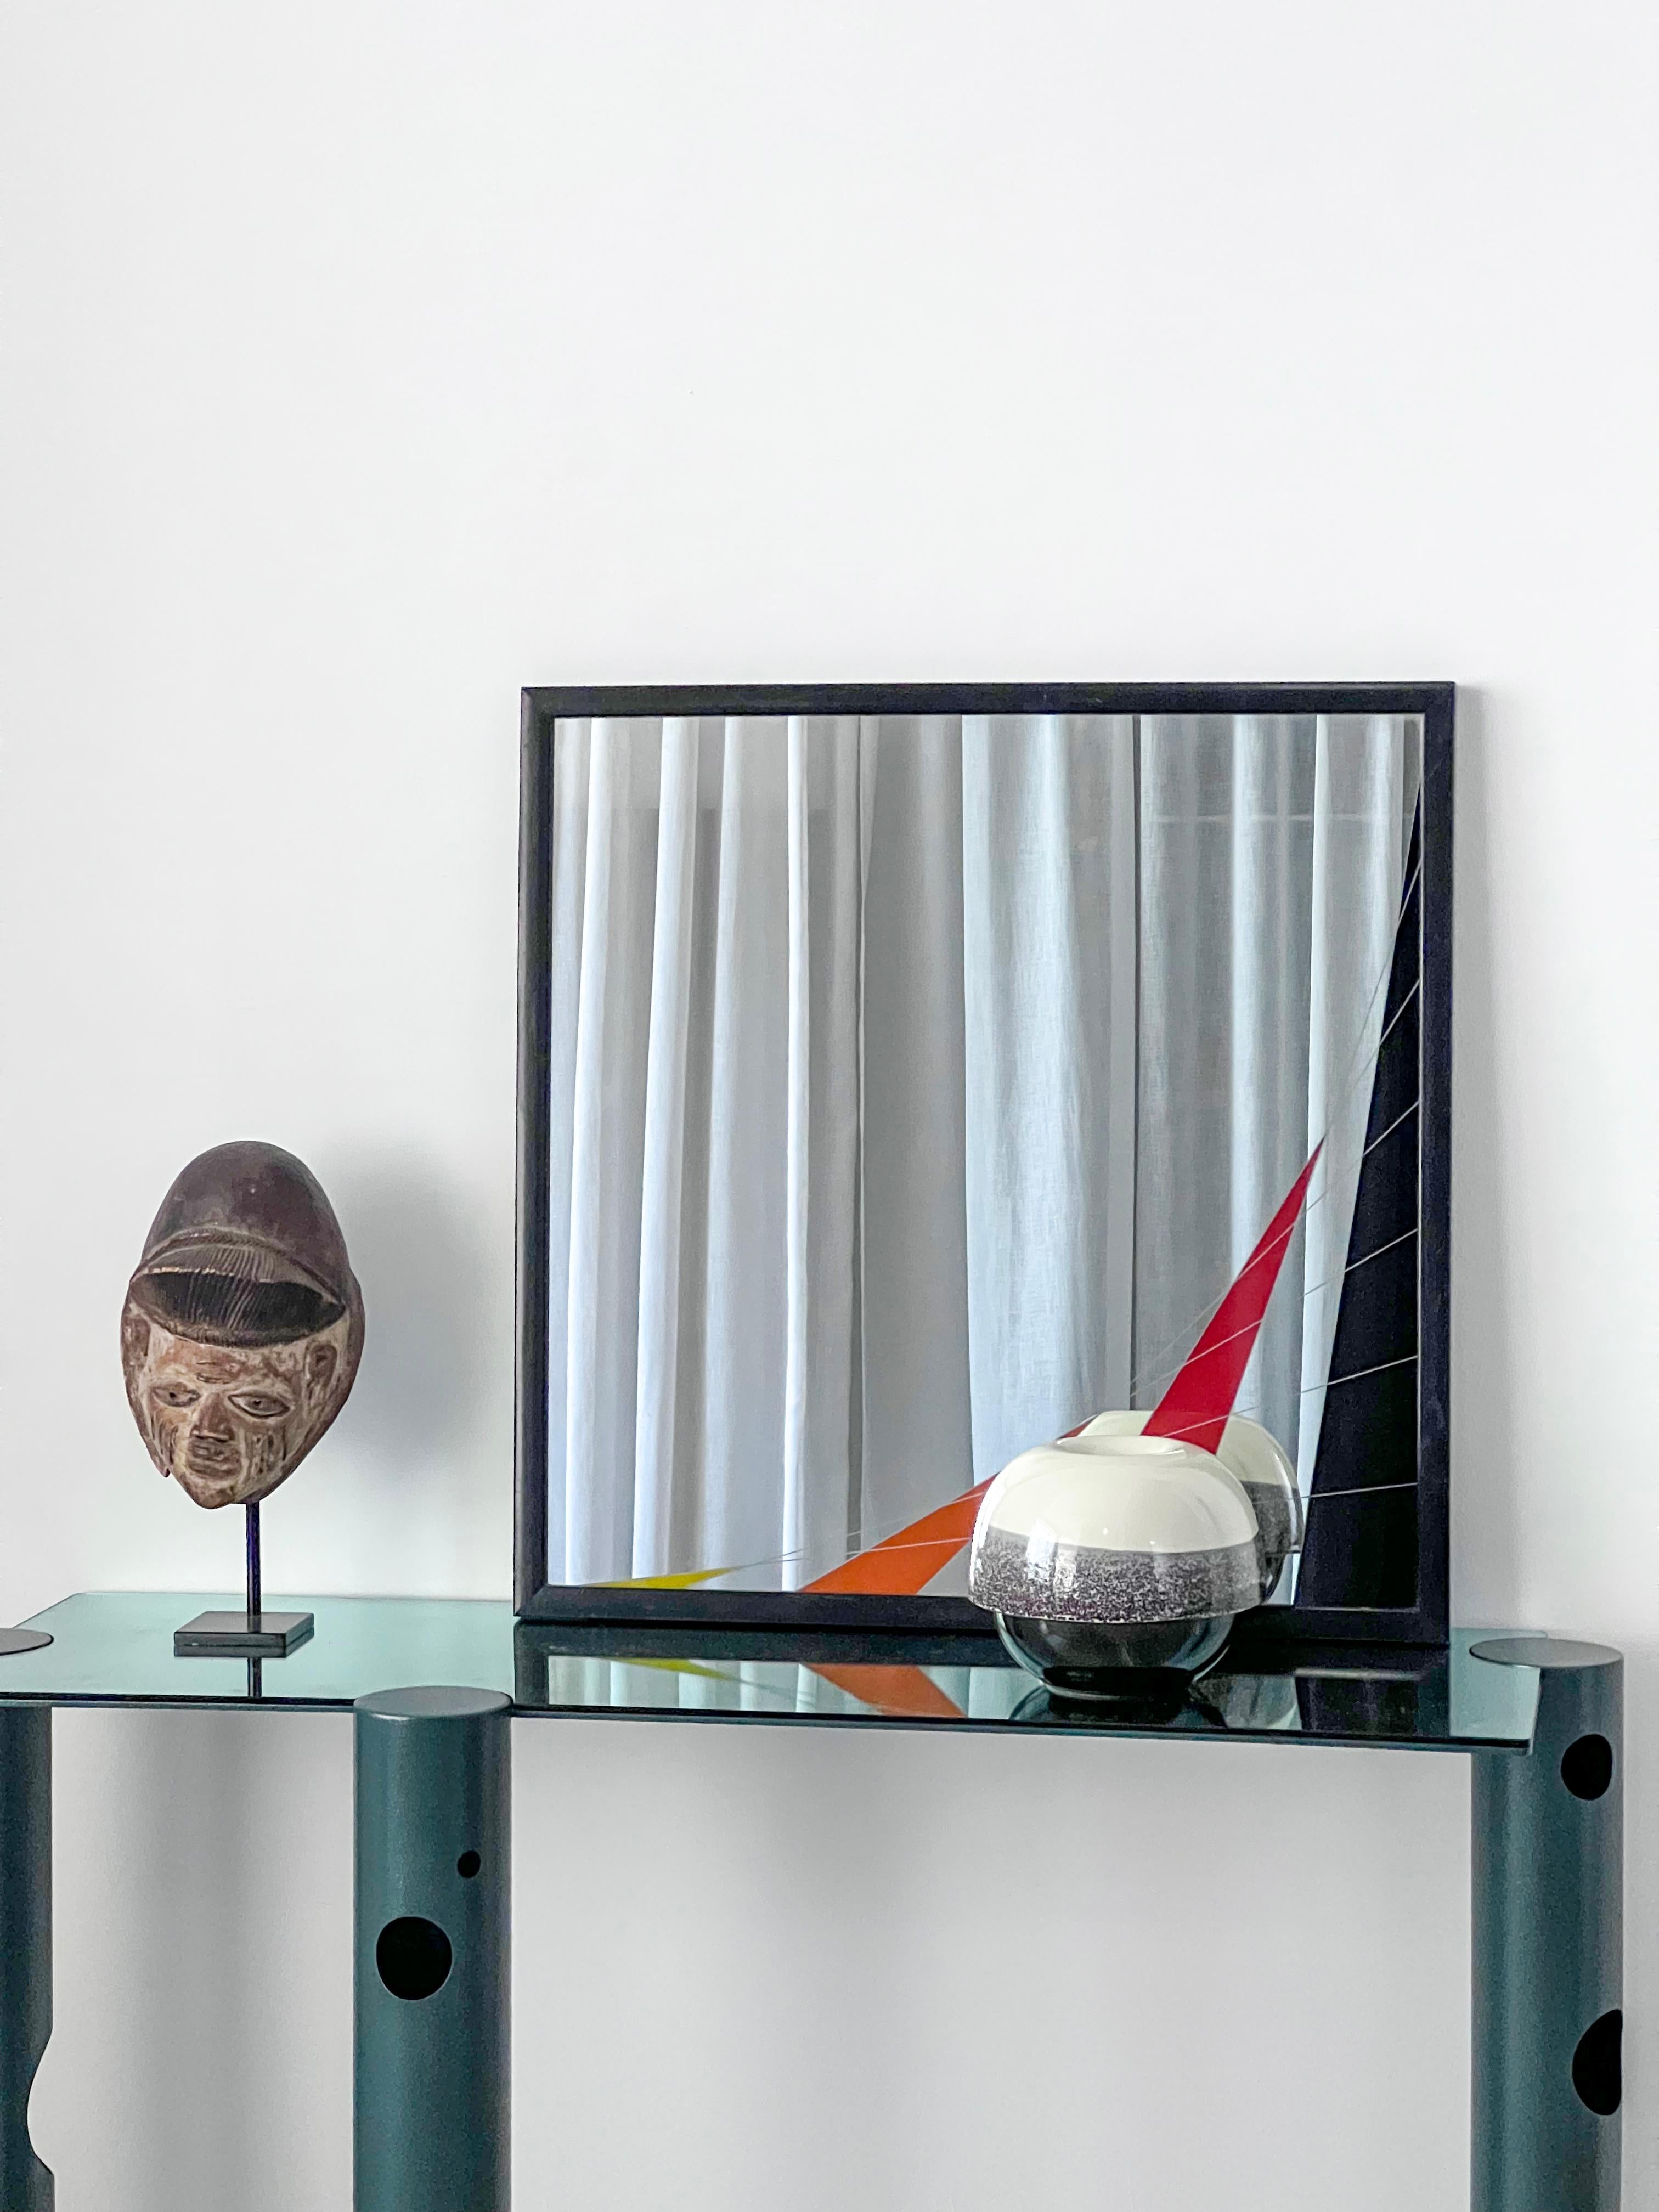 Decorative wall mirror designed by Italian artist Eugenio Carmi in his signature style of geometric, colorful decoration, typical on the 1980s and specifically of the 